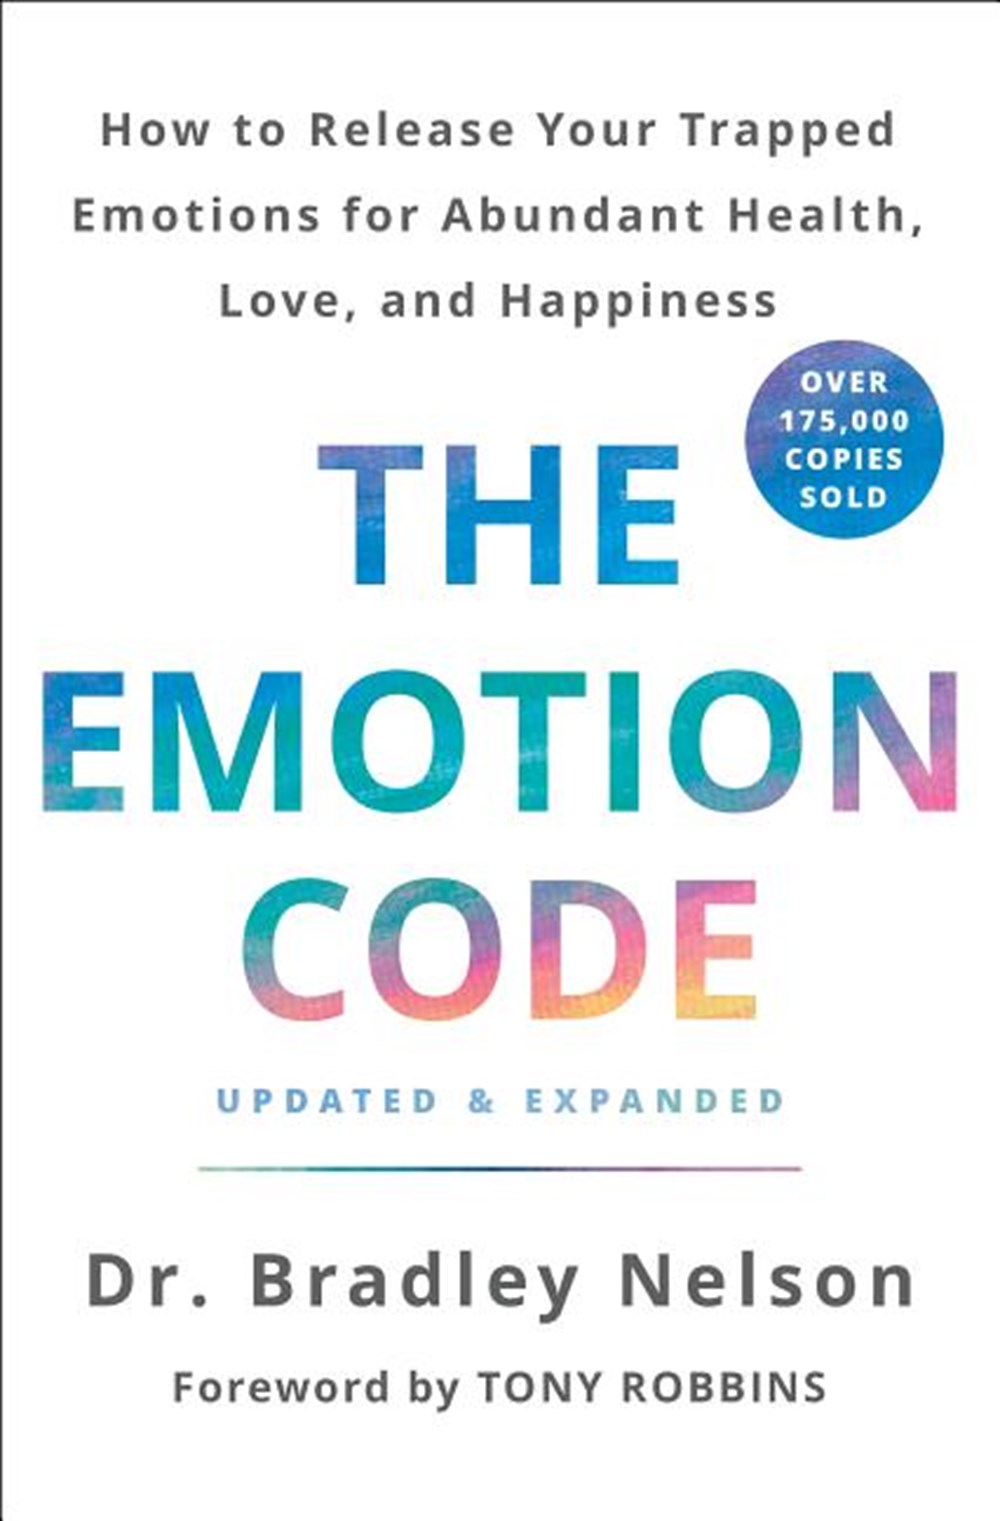 Emotion Code: How to Release Your Trapped Emotions for Abundant Health, Love, and Happiness (Updated